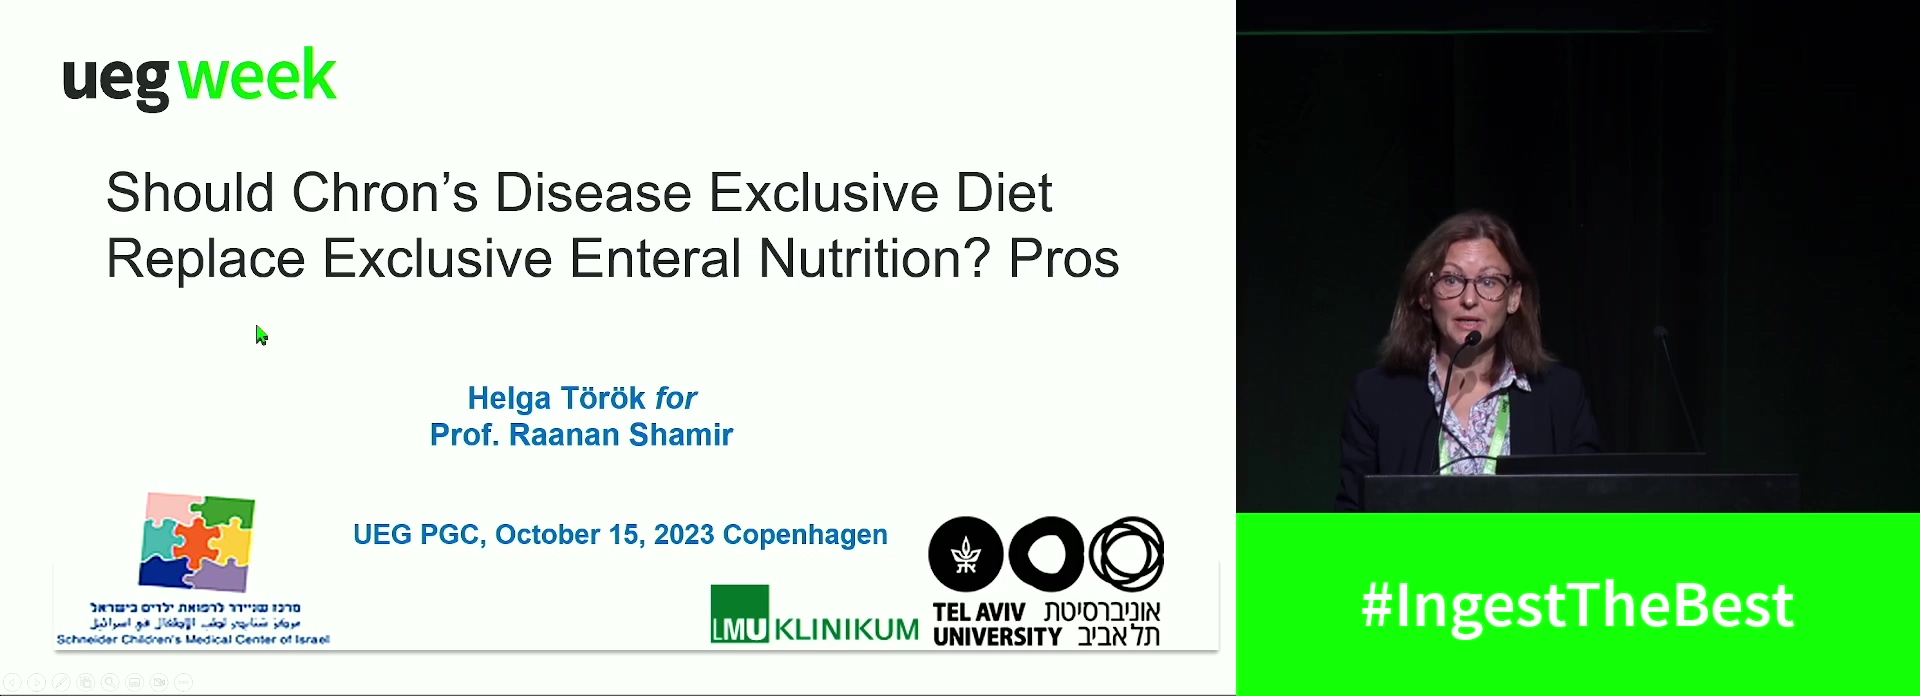 Should Crohn’s disease exclusive diet replace exclusive enteral nutrition? Pros and cons